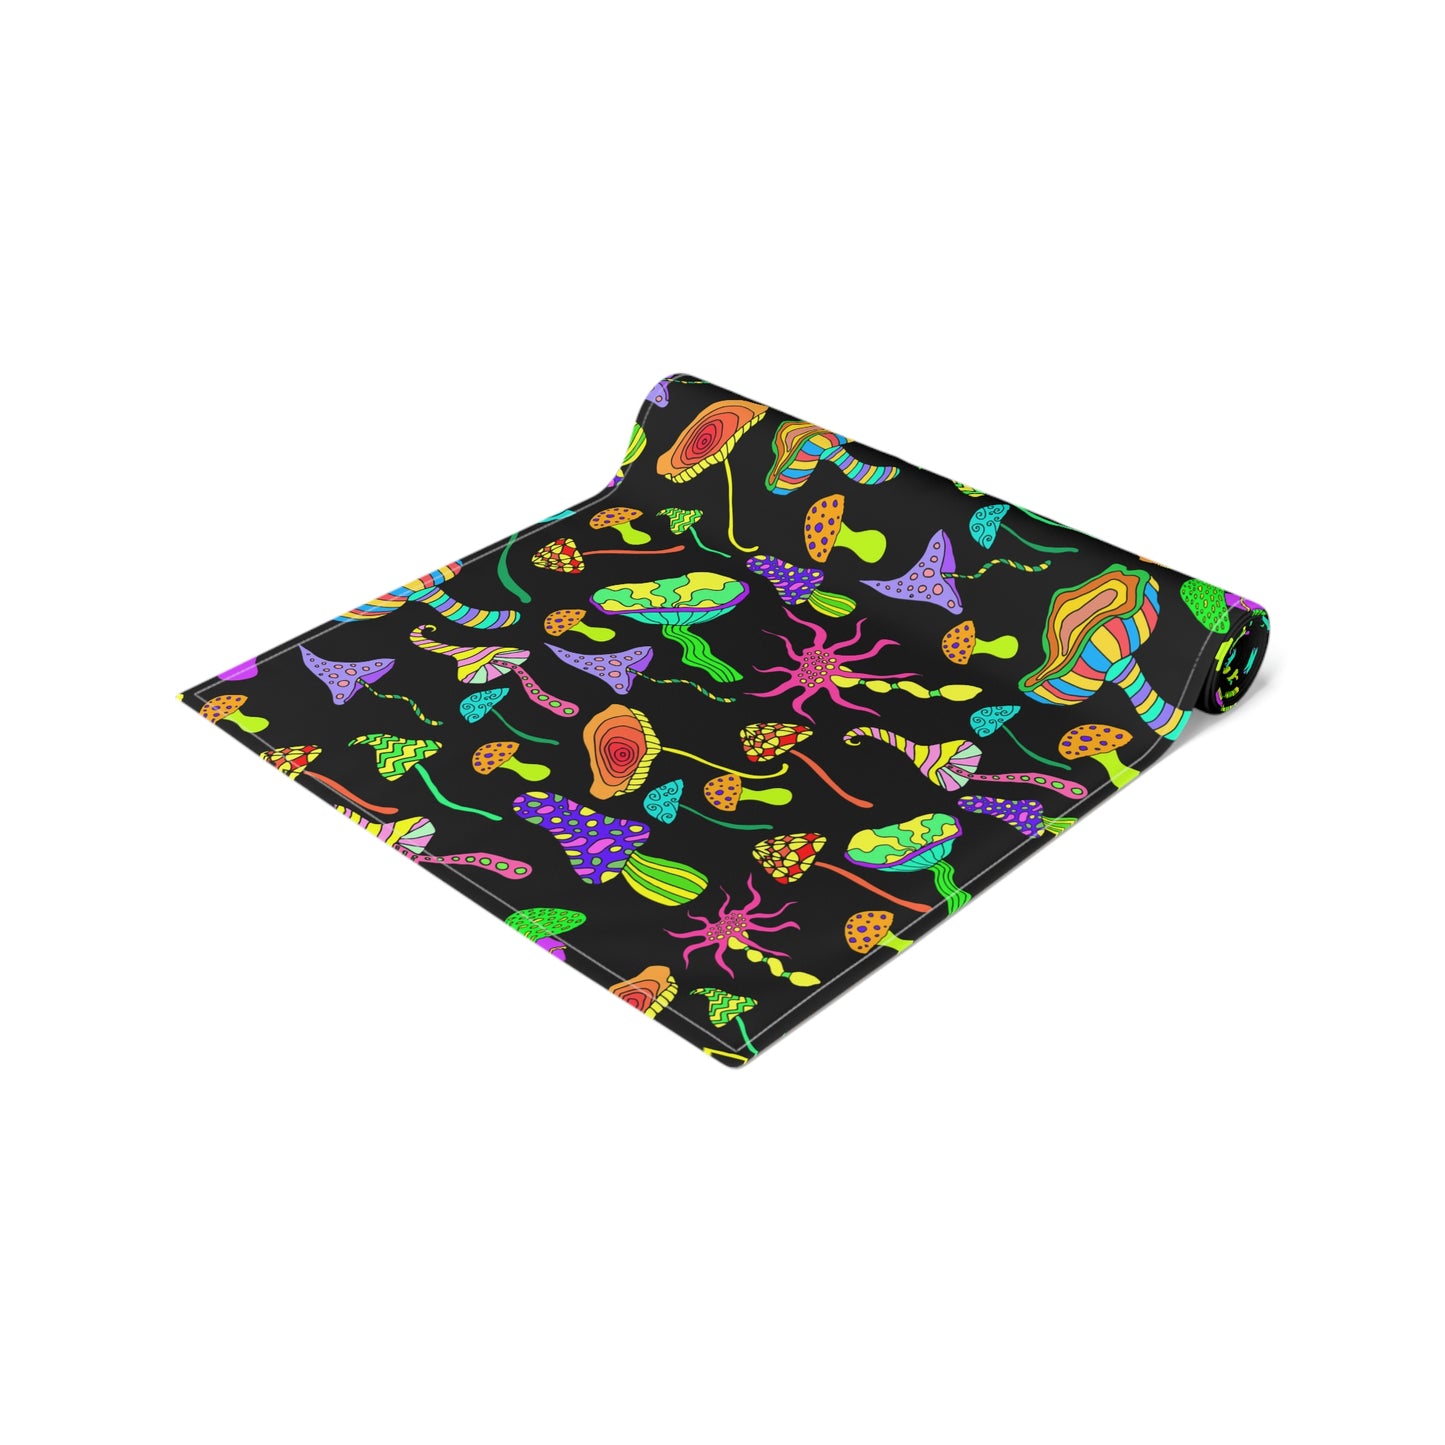 Happy Mushrooms Table Runner (Cotton, Poly)